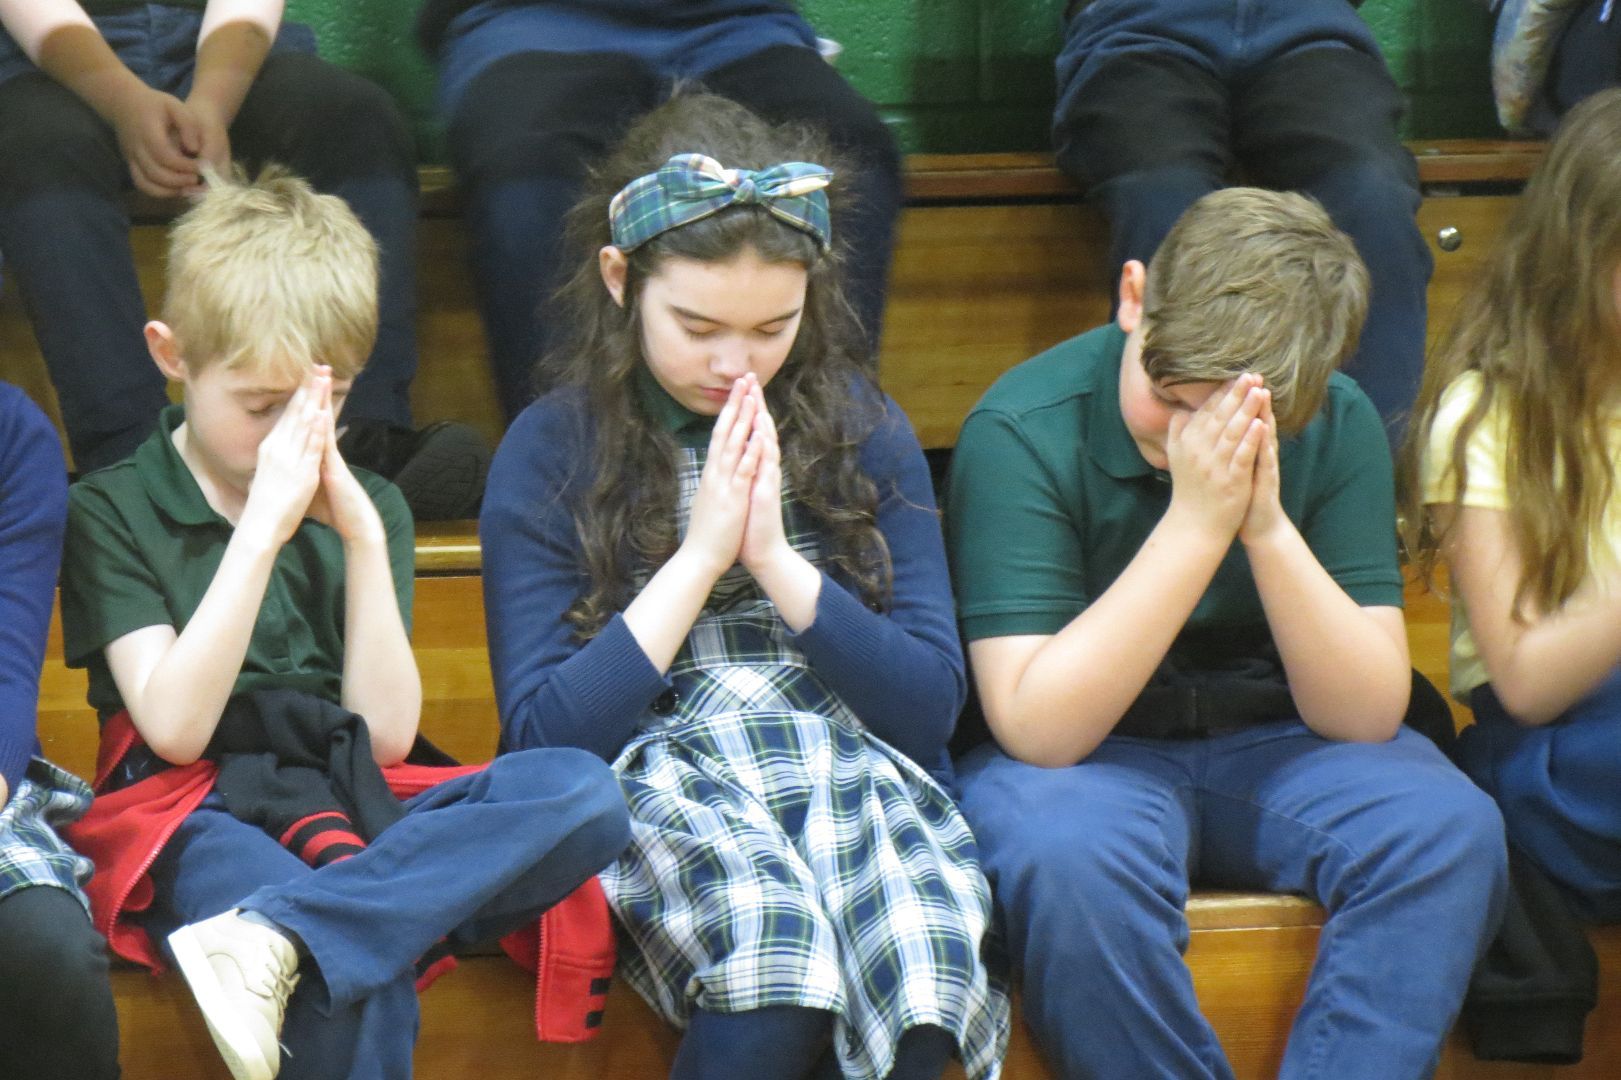 A group of children are sitting on the bleachers with their hands folded in prayer